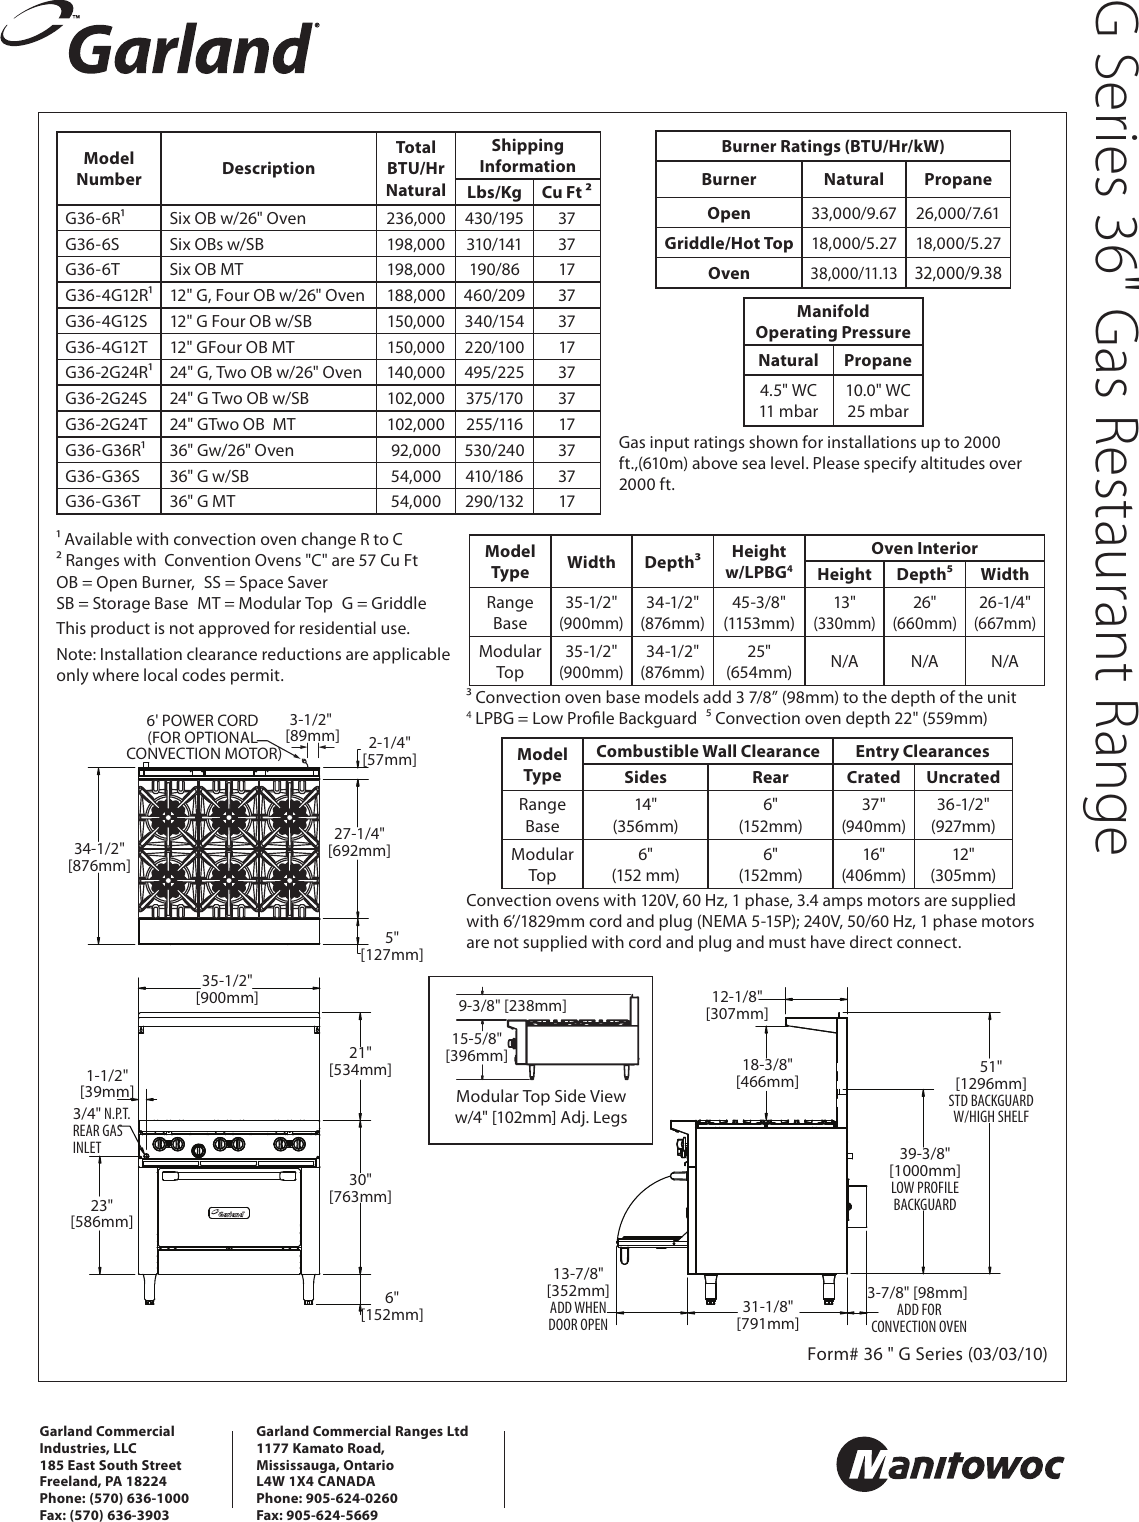 Page 2 of 2 - Garland Garland-G-Series-G36-2G24R-Users-Manual-  Garland-g-series-g36-2g24r-users-manual